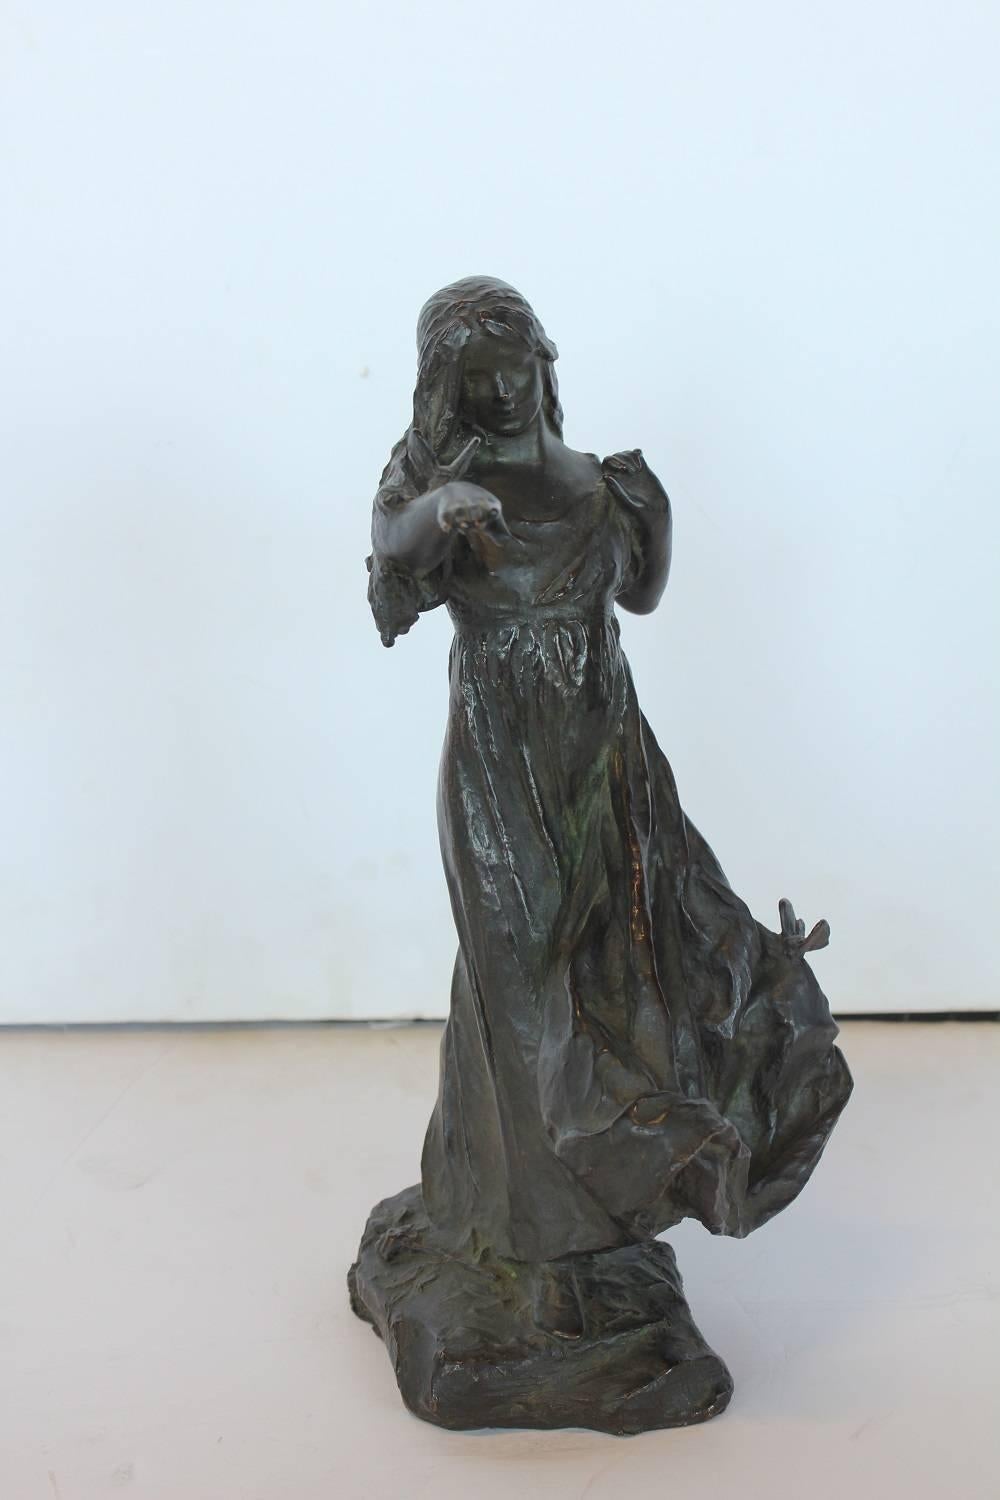 Antique Bronze Figurine By Bessie Potter Vonnoh 1872-1955. It is signed. A Saint Louis native, Bessie Onahotema Potter Vonnoh produced genre statuettes depicting domestic and feminine subjects that not only captured a refined segment of